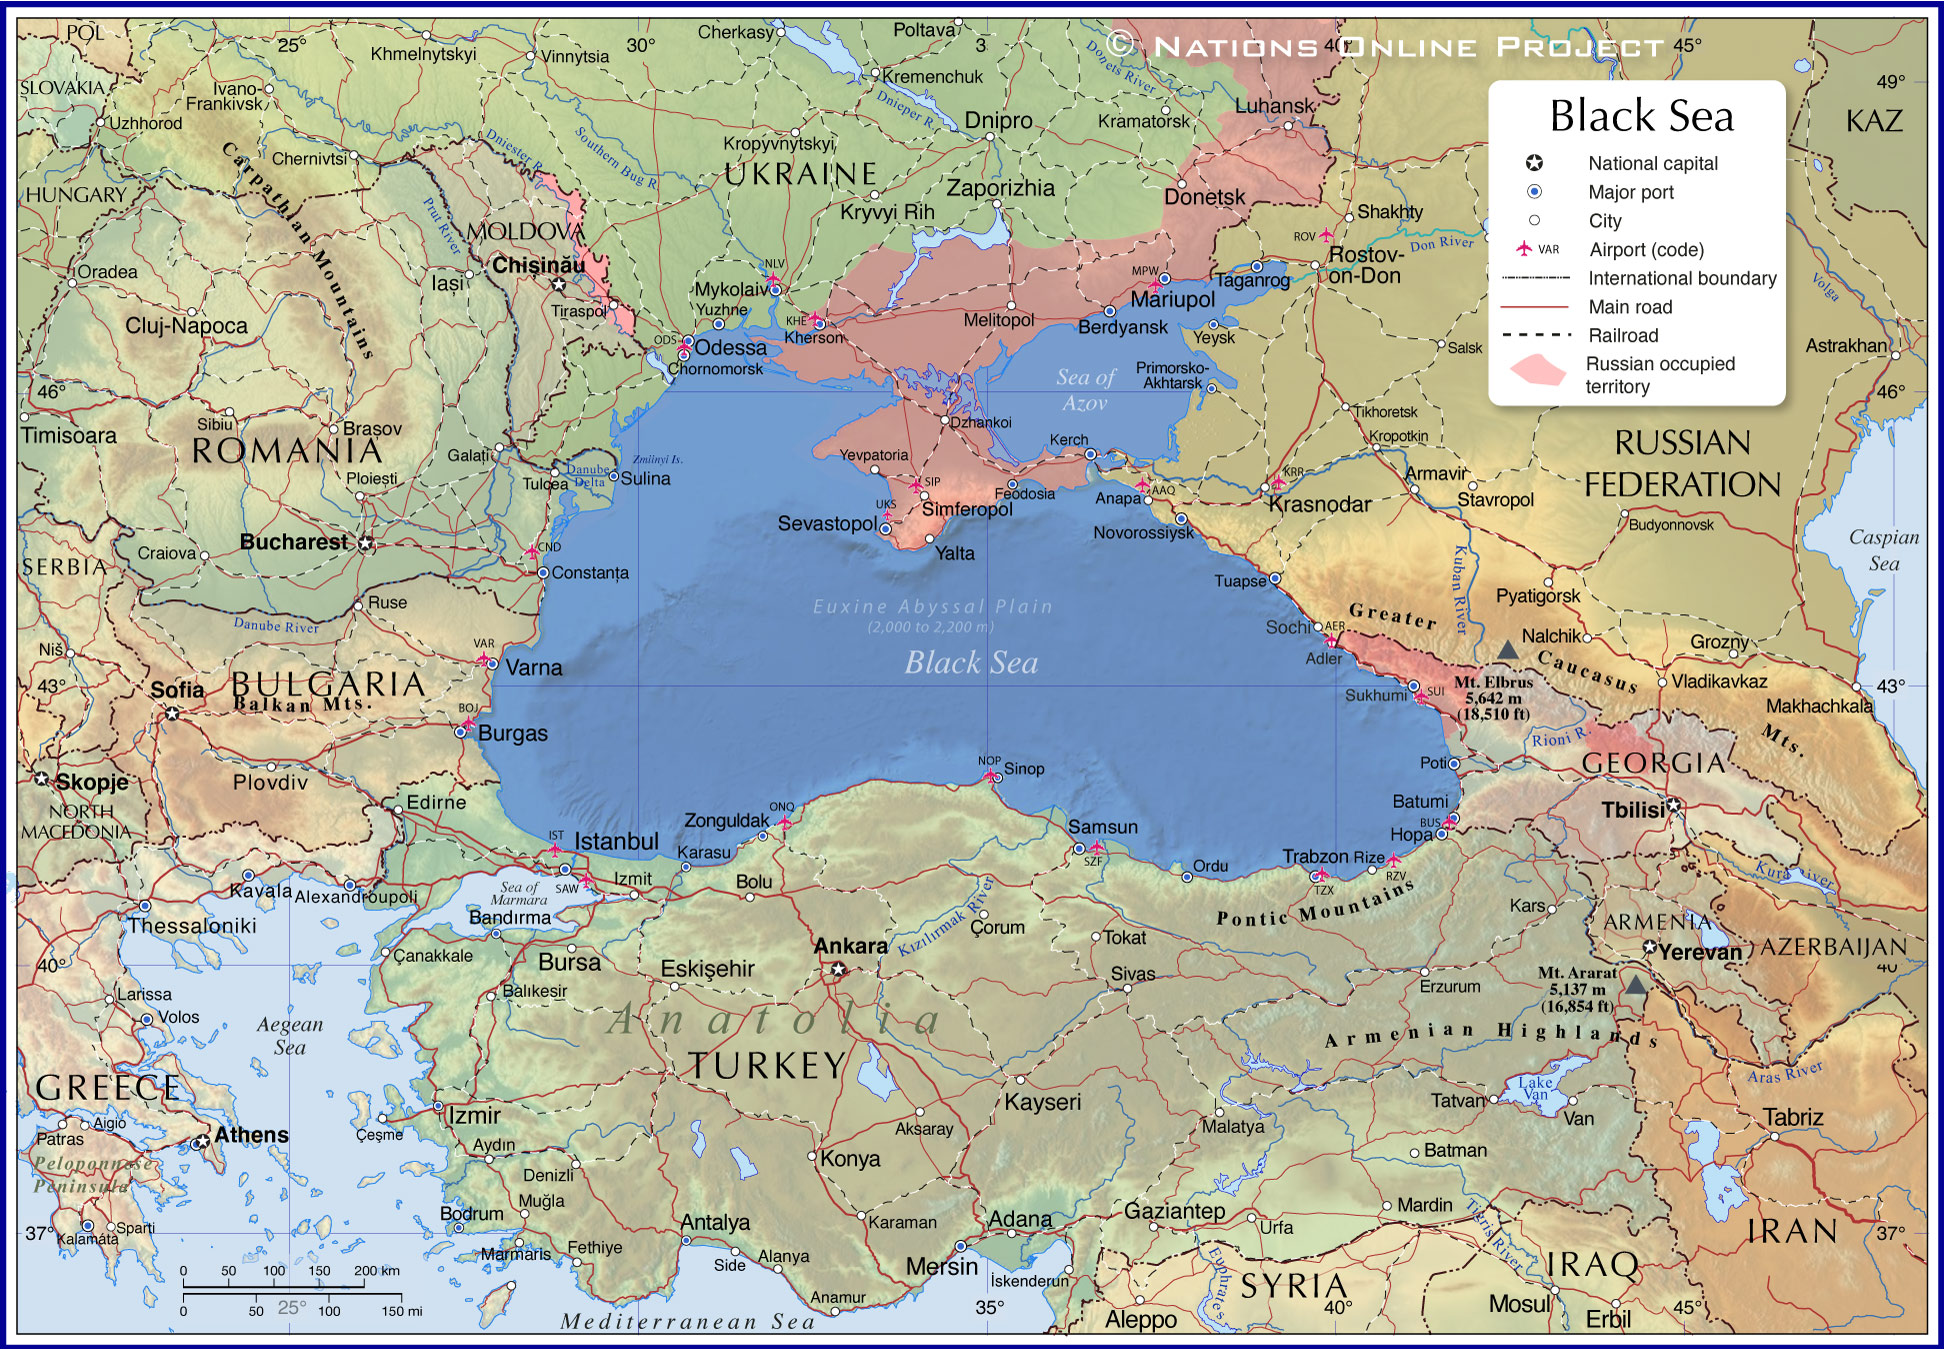 General Map of the Black Sea with bordering countries and major ports